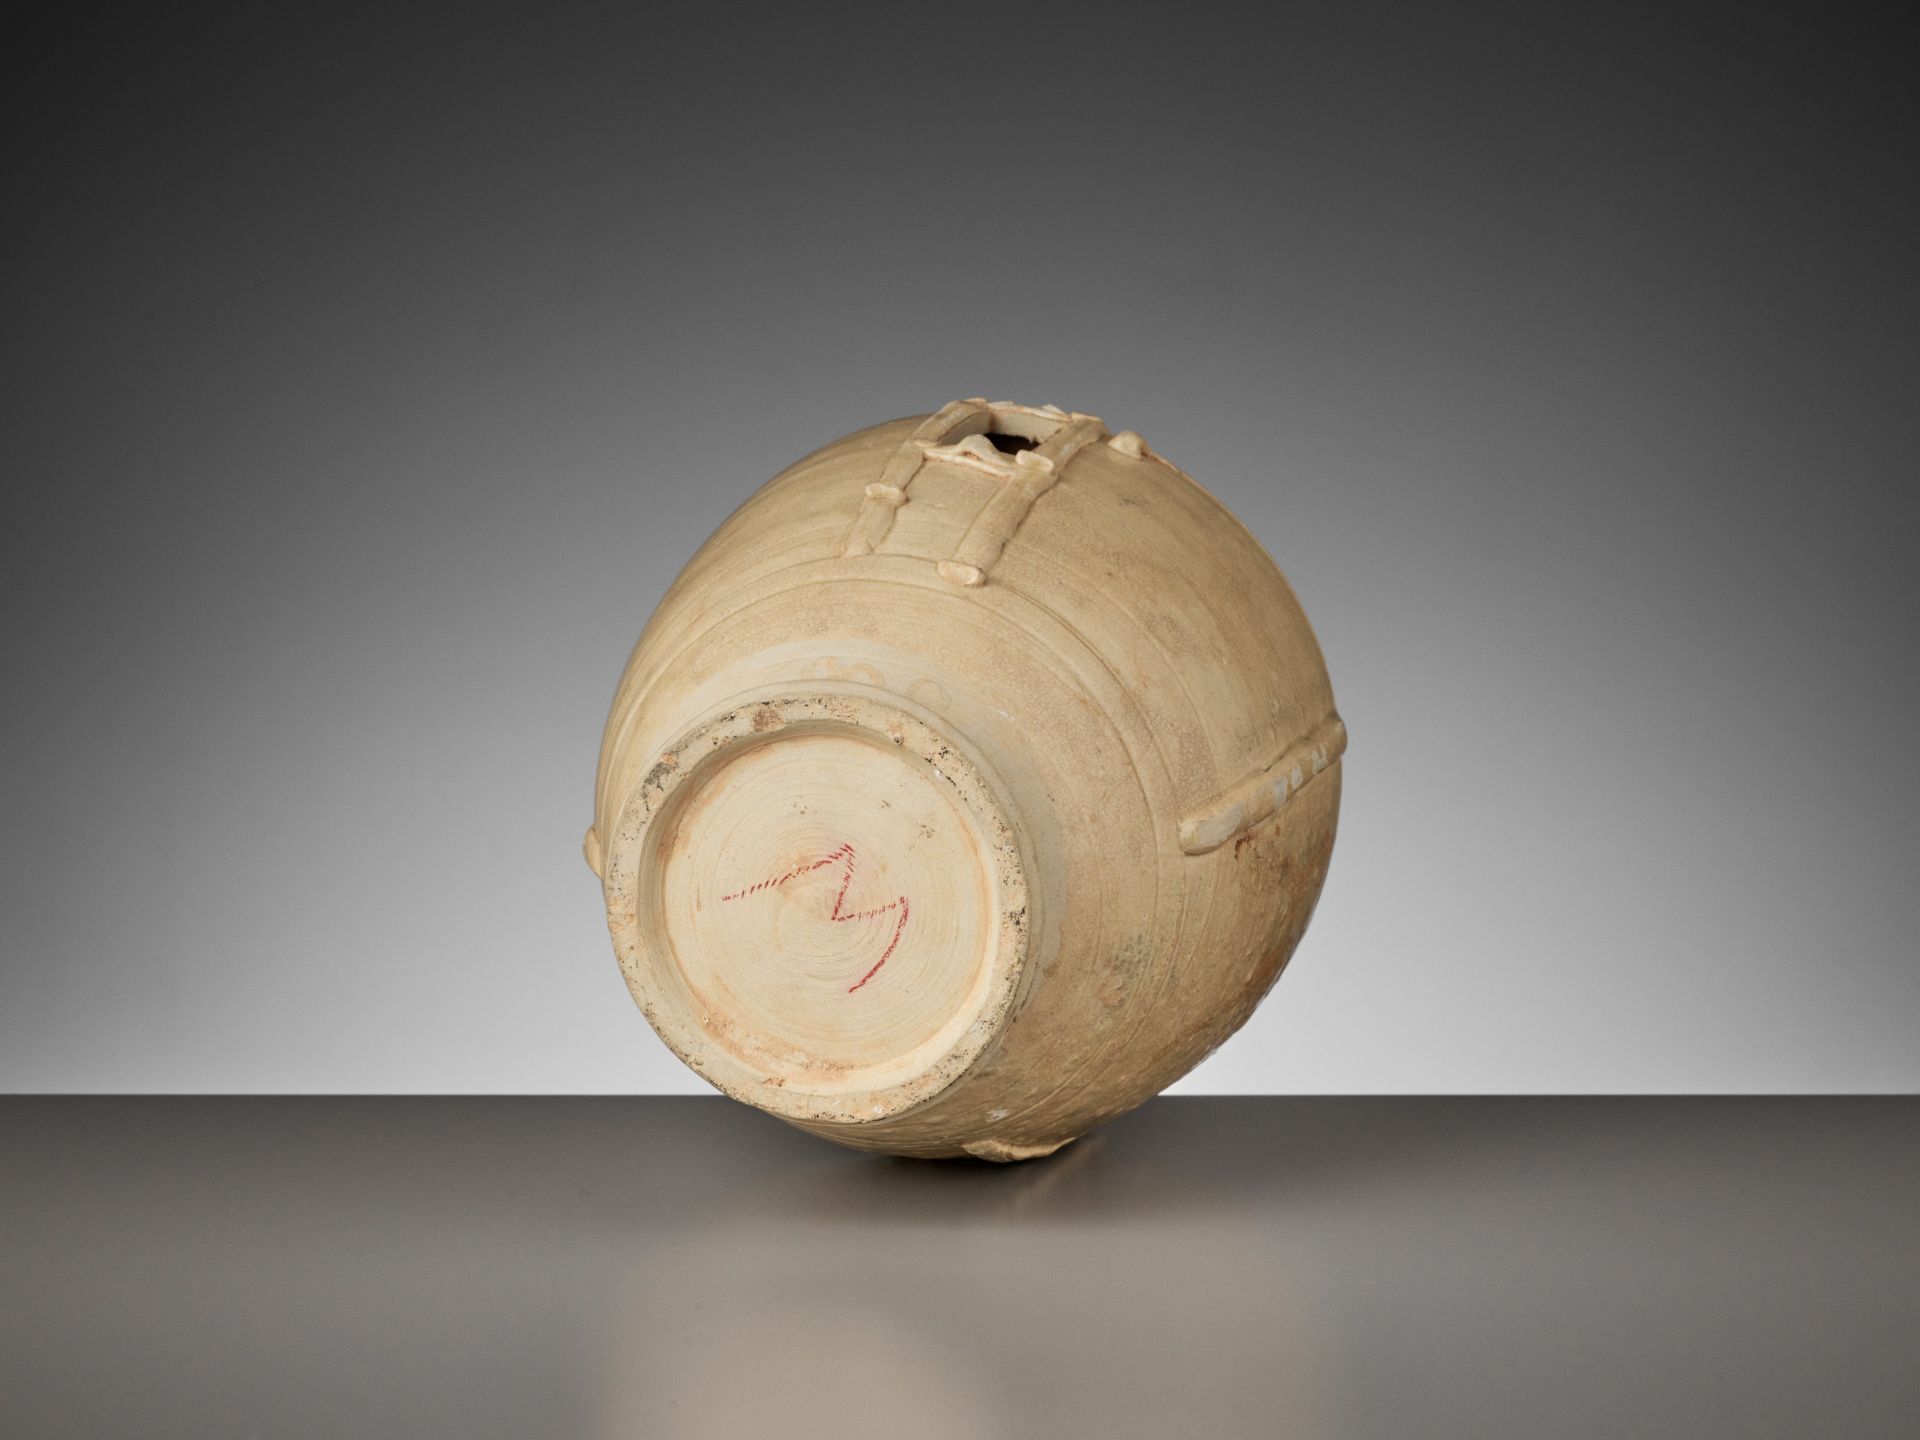 A RARE QINGBAI 'GRANARY' VESSEL, SOUTHERN SONG TO YUAN DYNASTY - Image 8 of 8